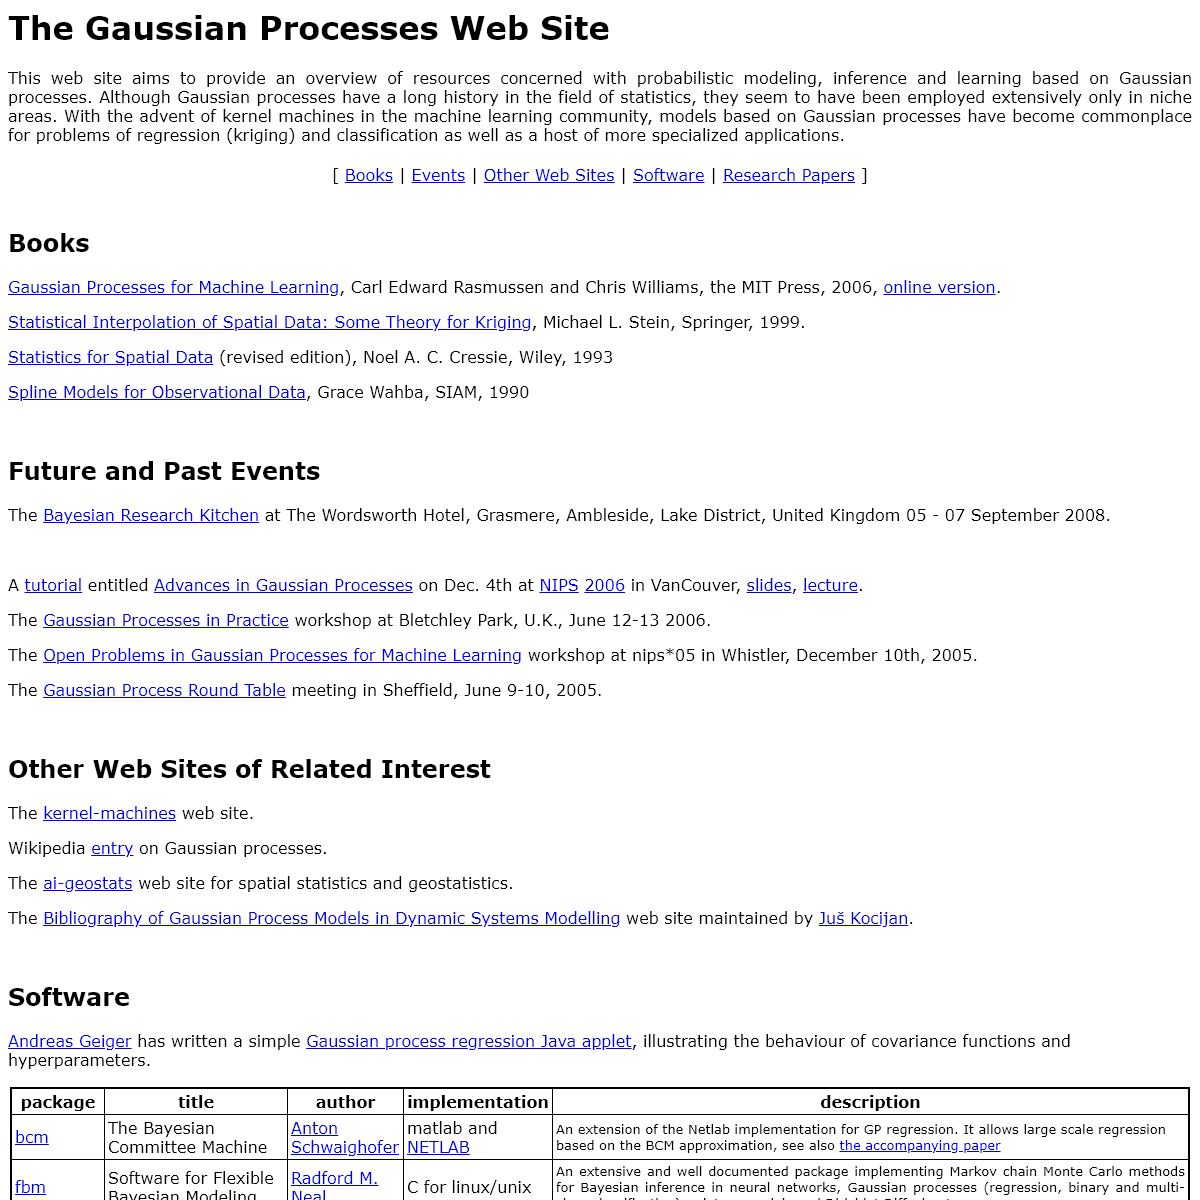 A complete backup of gaussianprocess.org